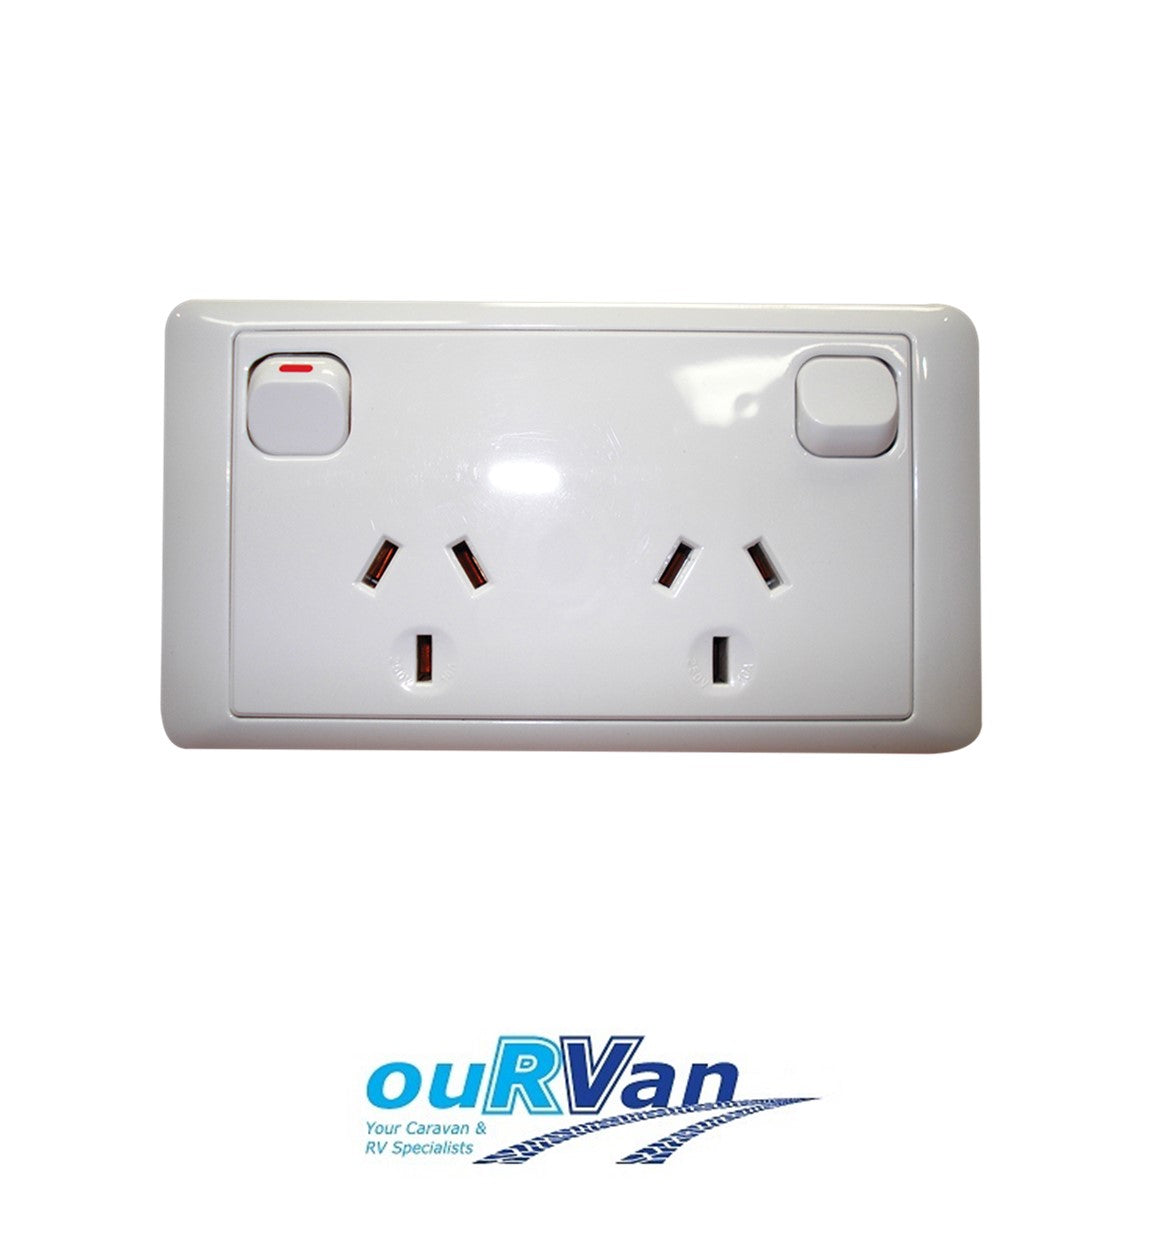 CMS DOUBLE WHITE 10AMP POWER OUTLET W/20AMP INSTALL COUPLERS. J16.2NW